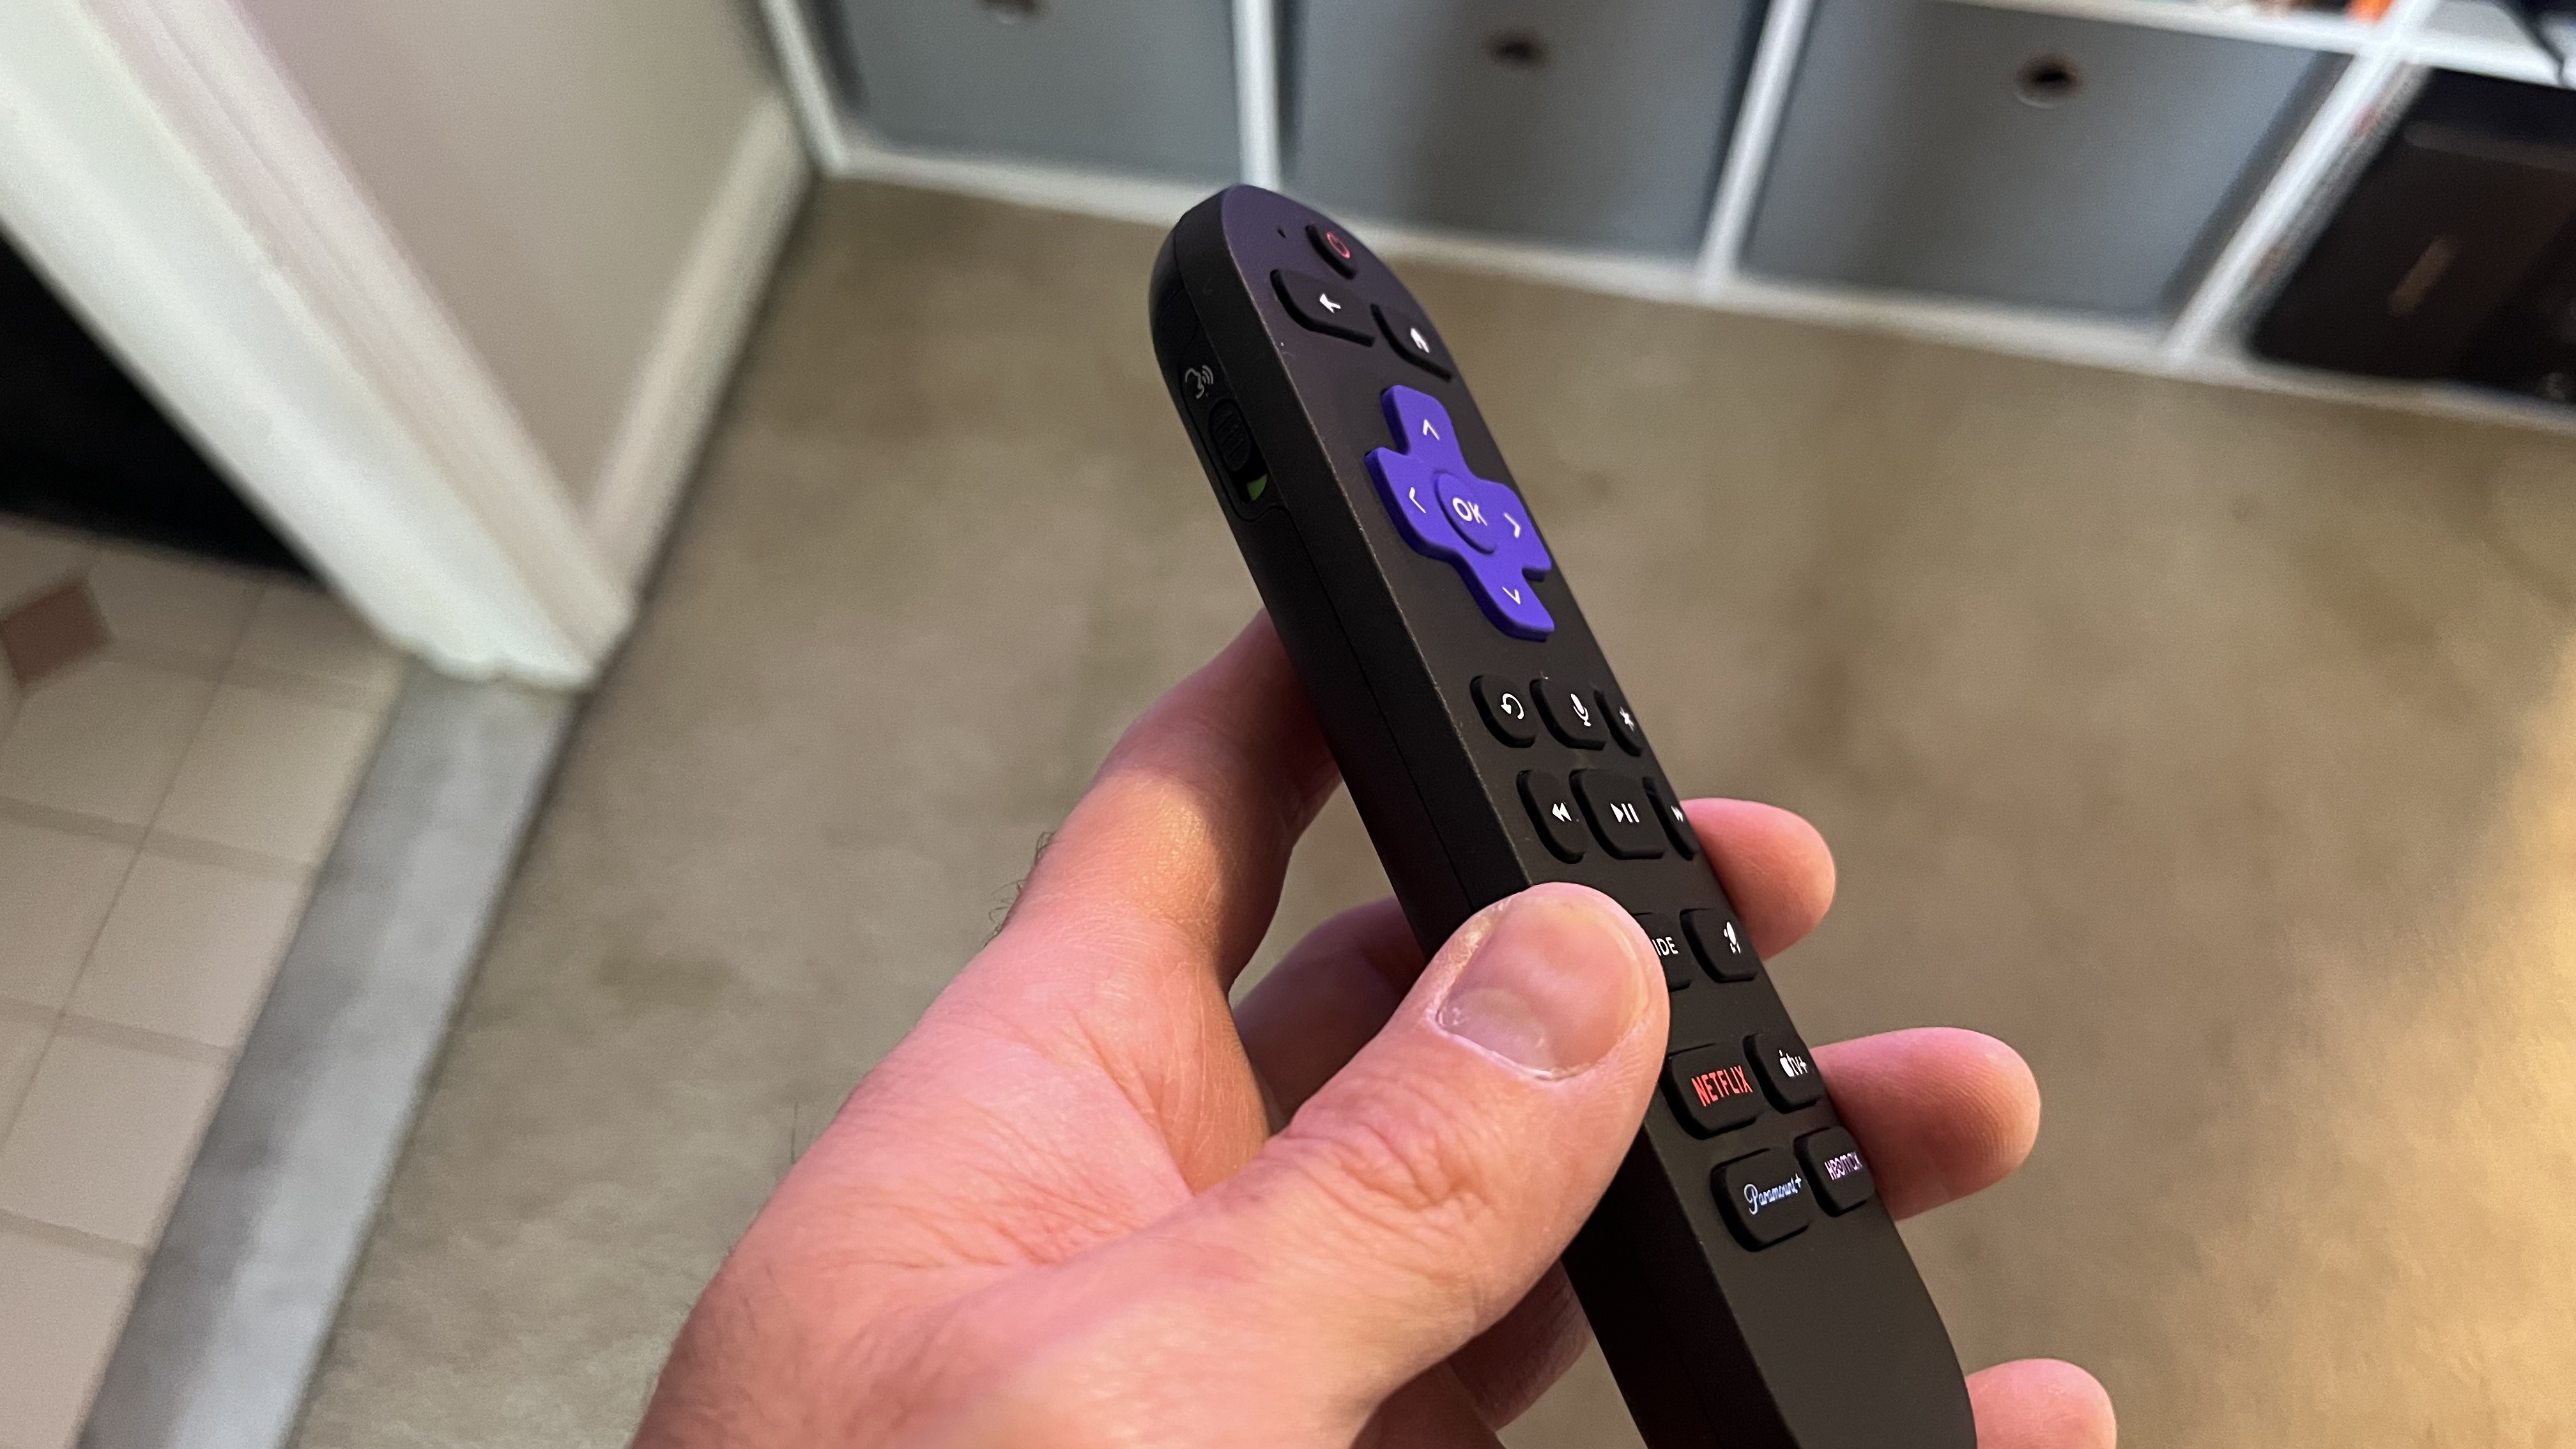 Roku Pro series remote control held in hand